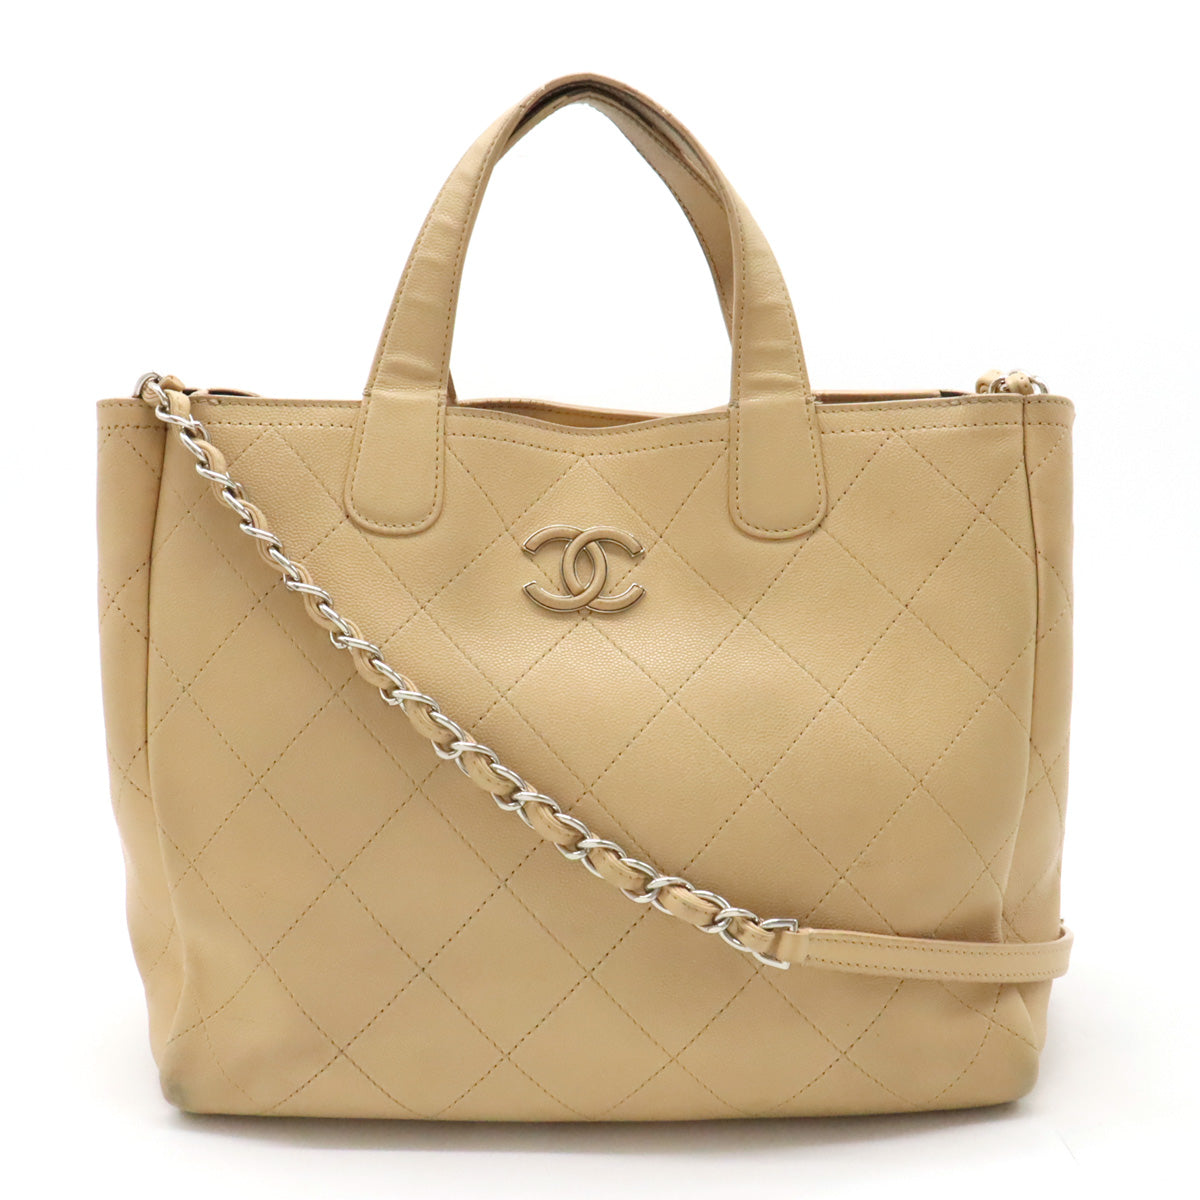 Chanel Matrasse Coco Tote Bag 2WAY Chain Shoulder Bag Caviar S Leather Beige AS0240